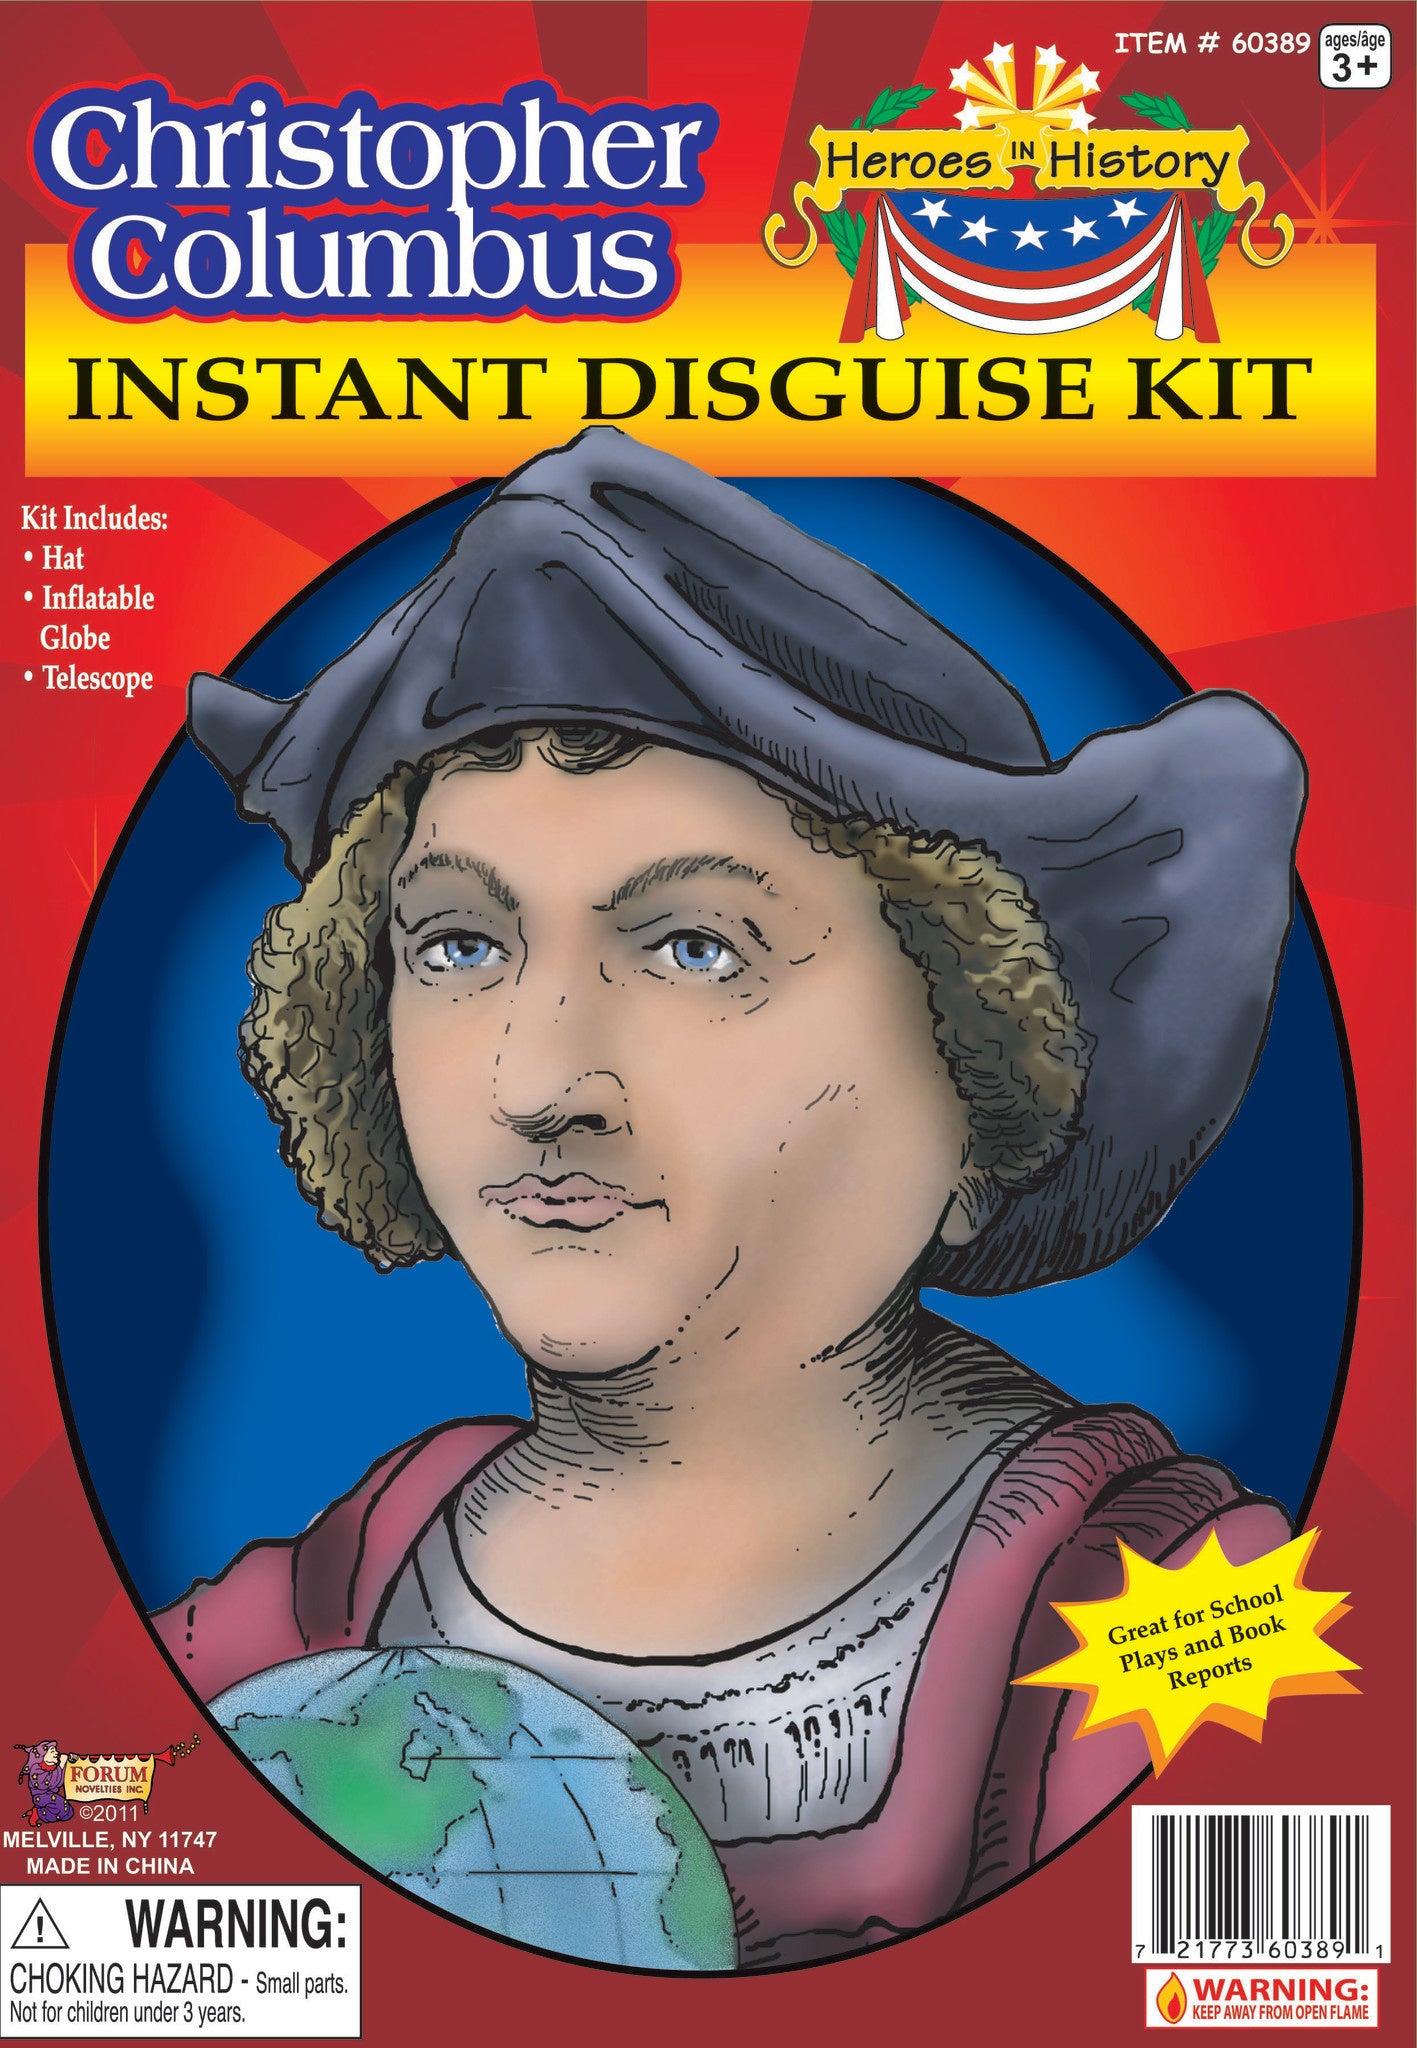 Instant Disguise Kit: Christopher Columbus